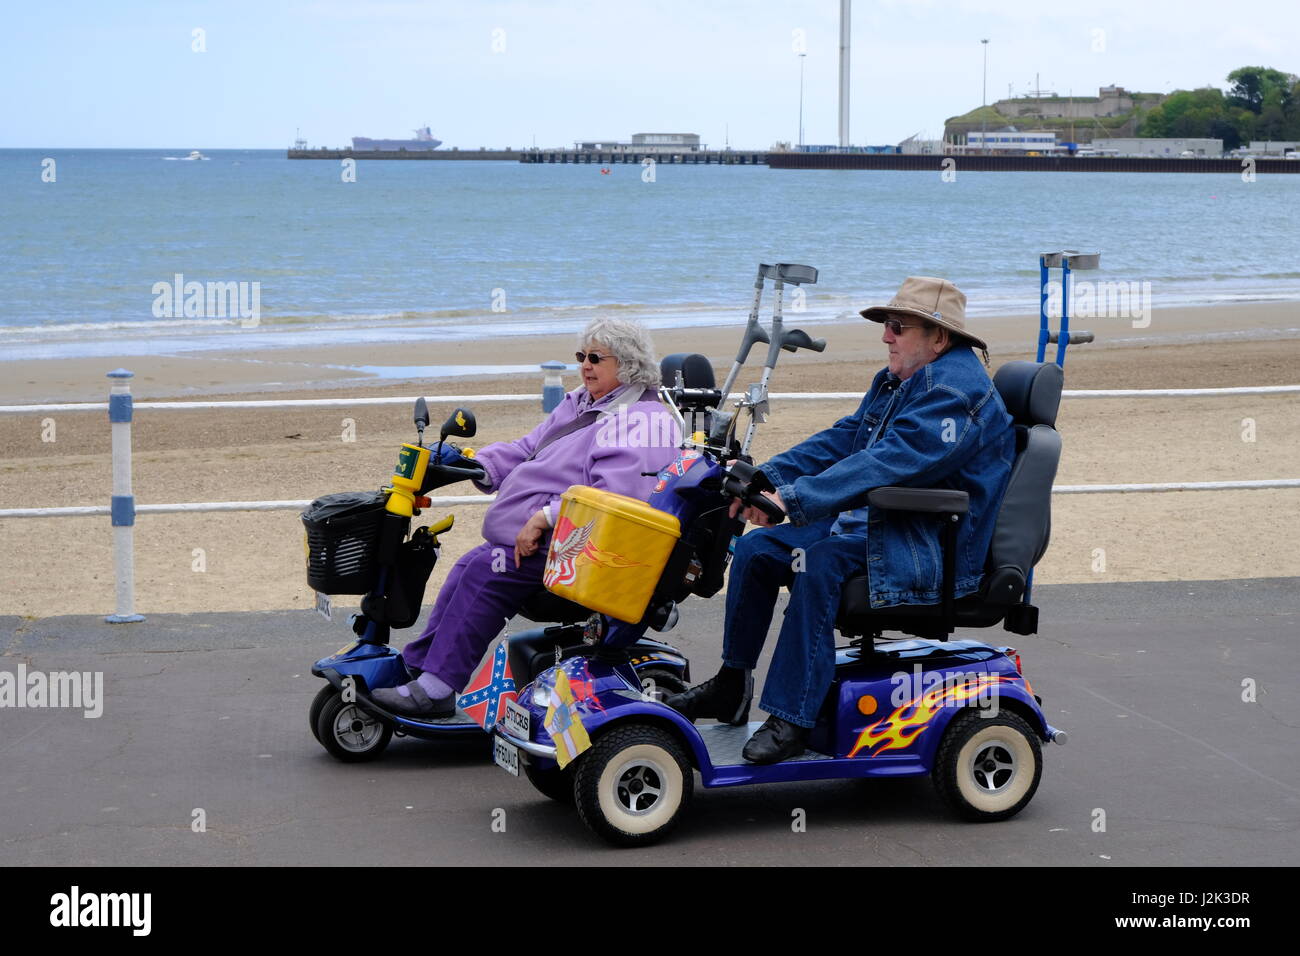 Weymouth, Dorset, UK. 29th Apr, 2017. Visitors wrap up warm and make the best or a cool and breezy day with occasional spells of sunshine at Weymouth as the weather is set to deteriorate tomorrow with rain moving into the area. Credit: Tom Corban/Alamy Live News Stock Photo